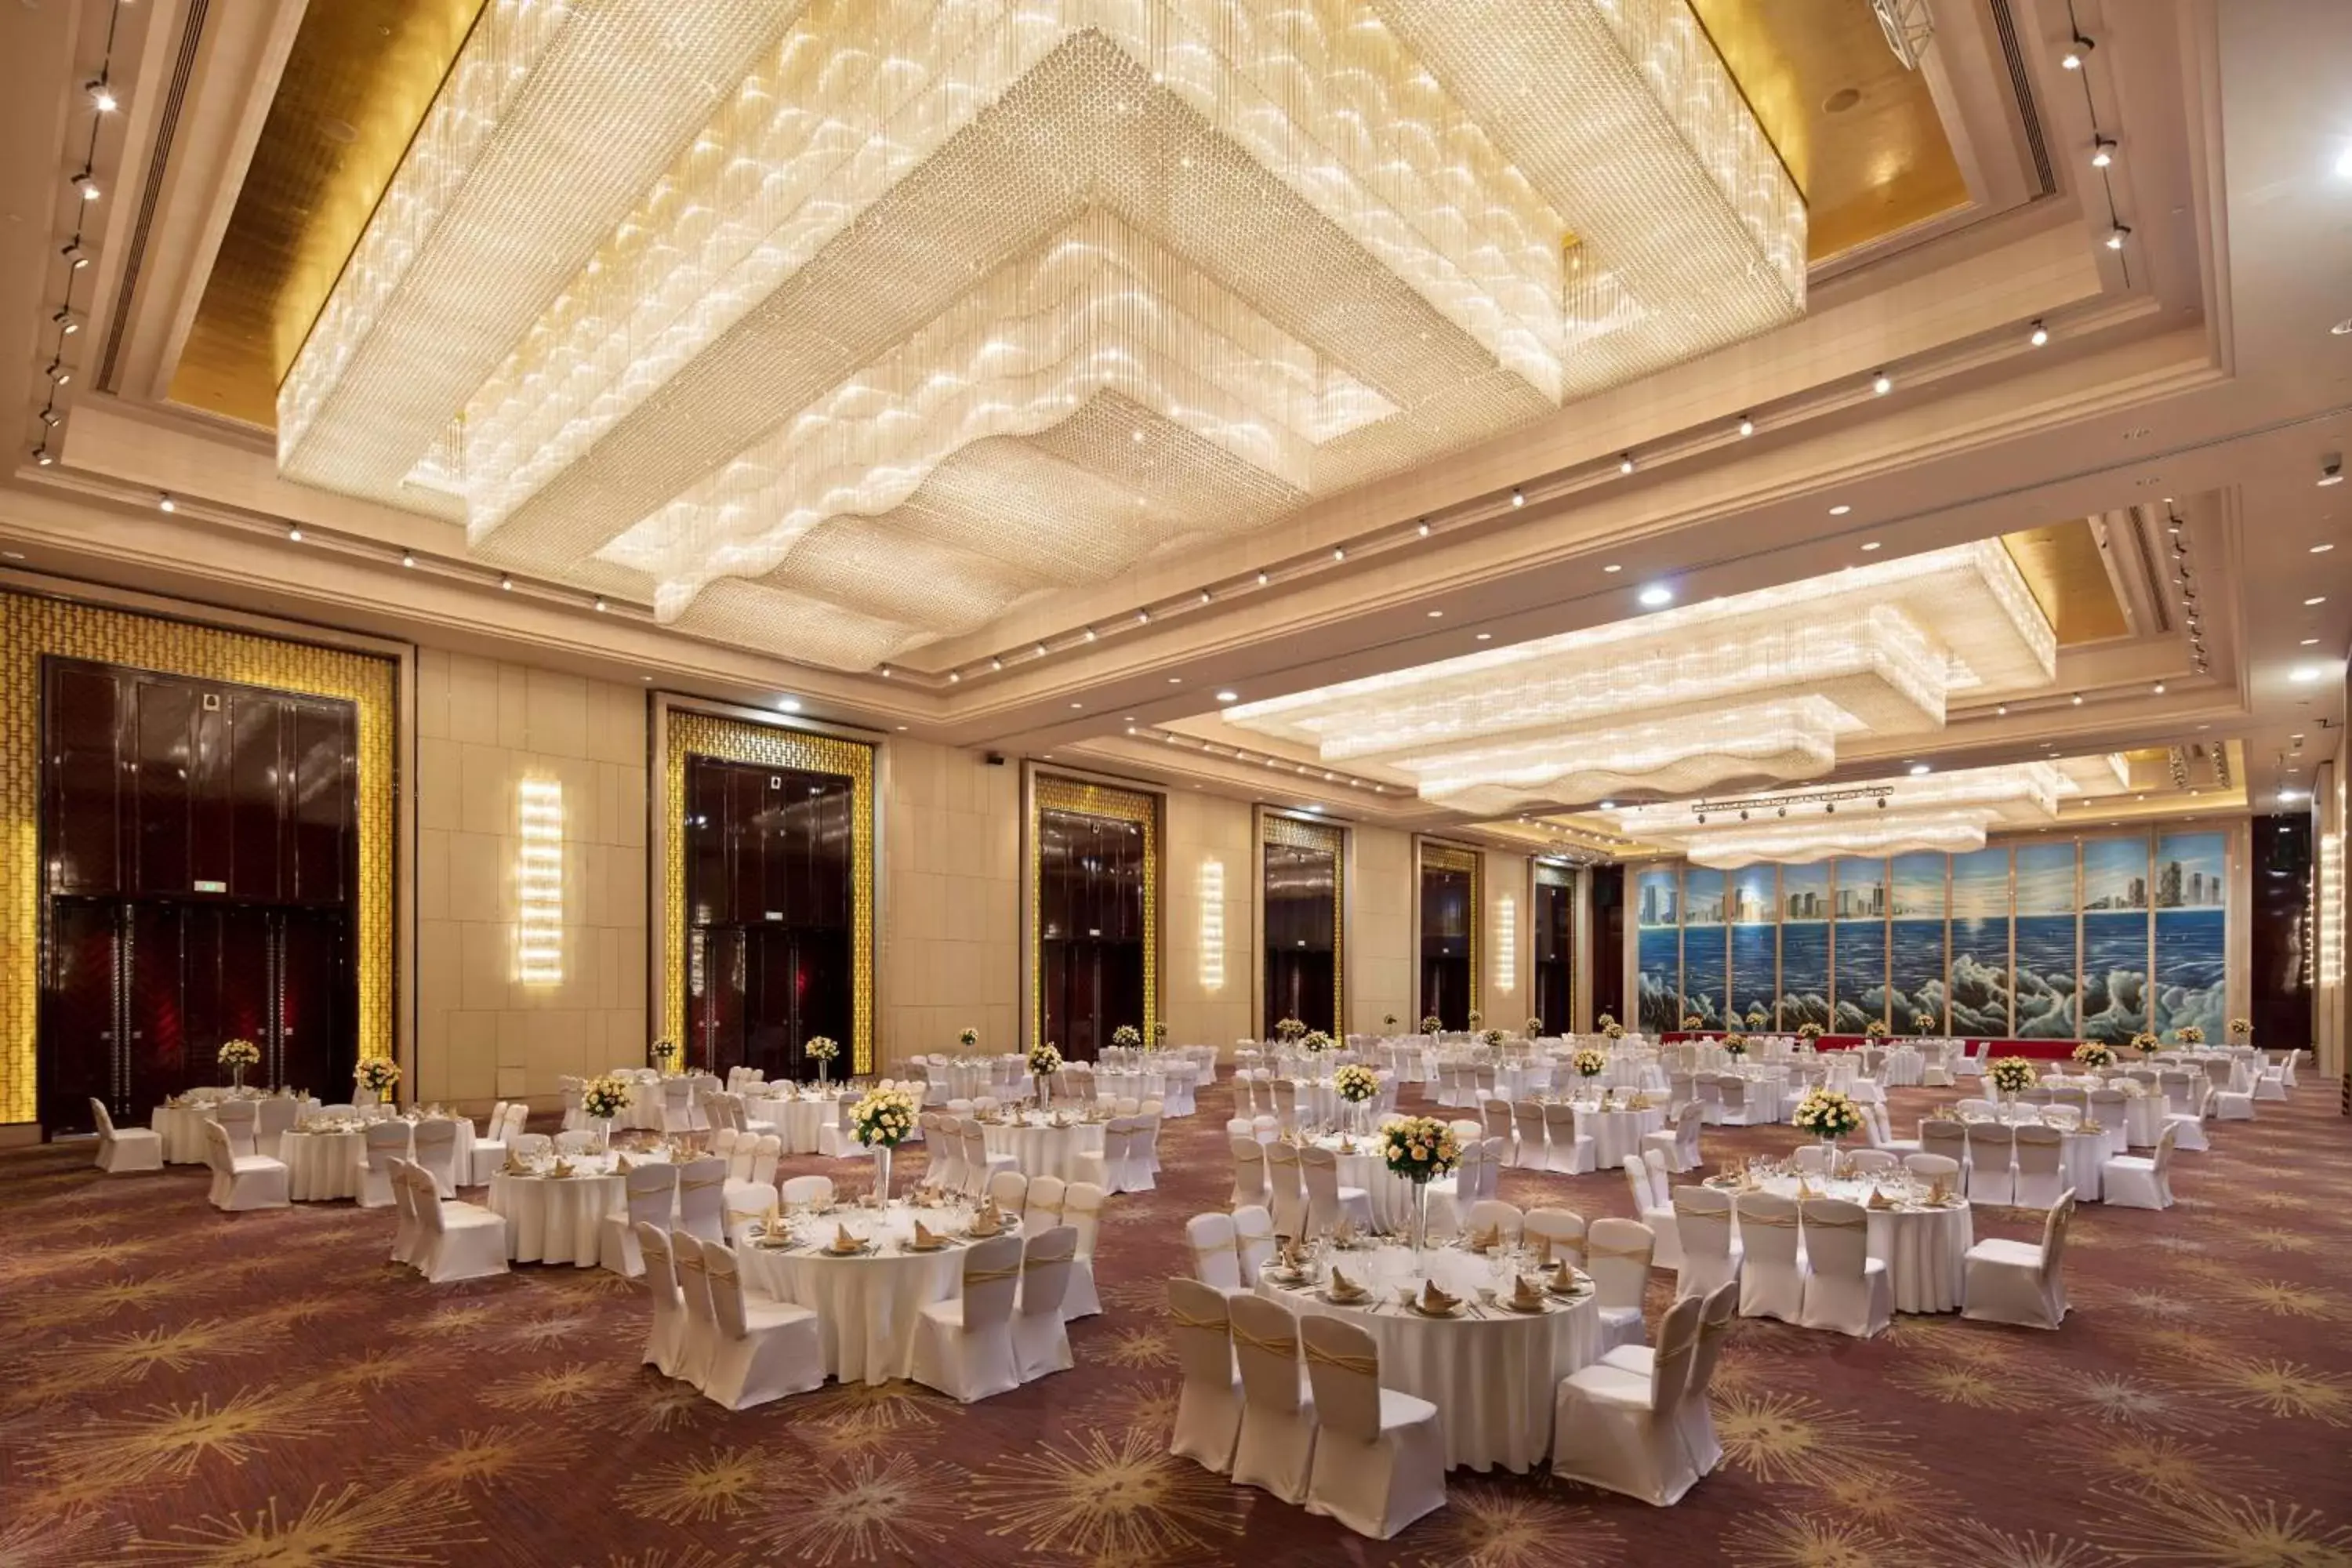 Meeting/conference room, Banquet Facilities in Hilton Dalian